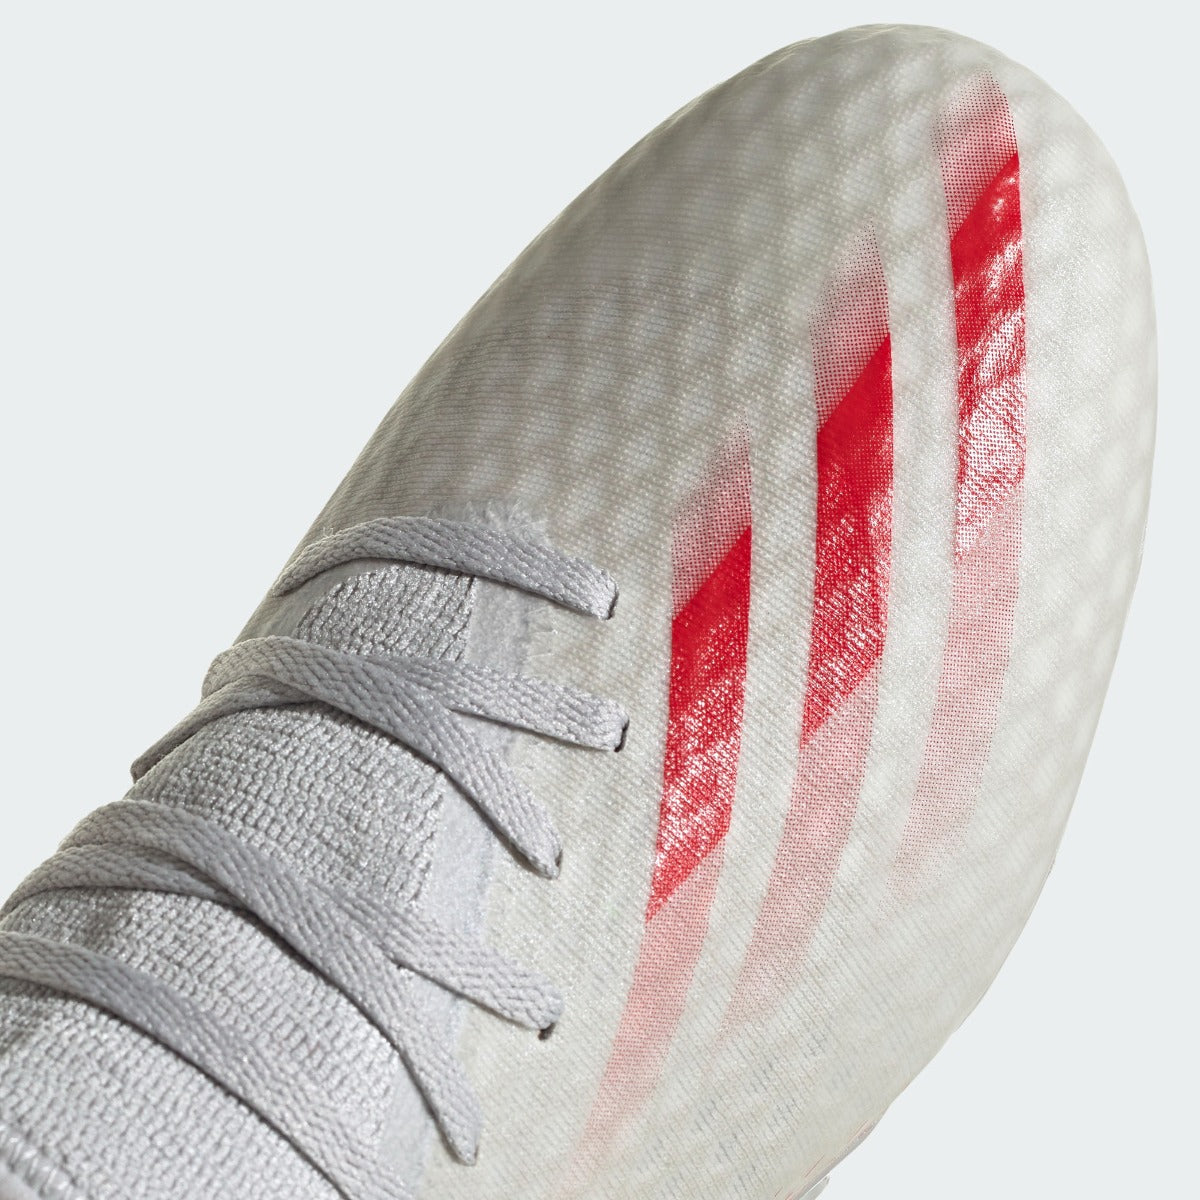 Adidas X Ghosted .3 FG - Grey-Red (Detail 1)